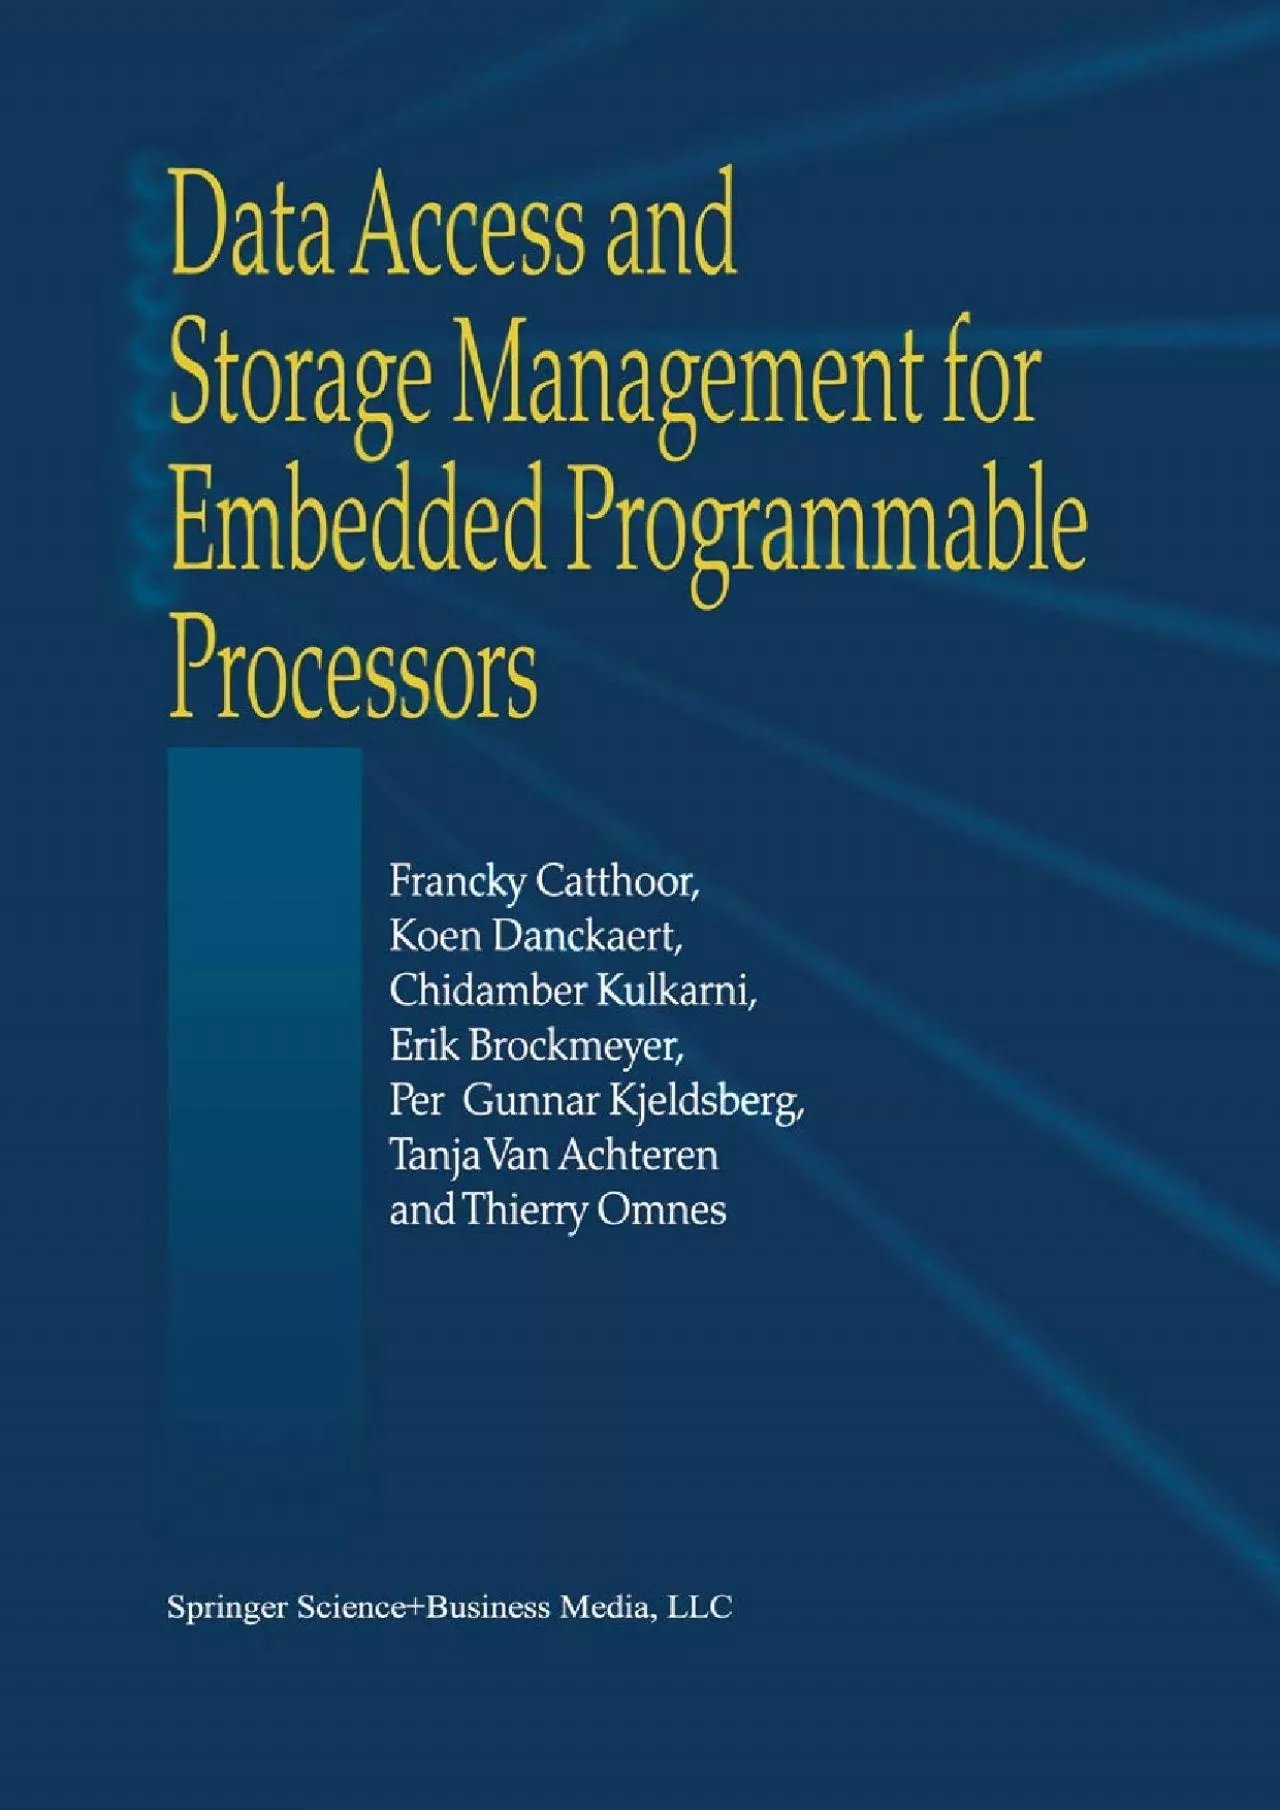 [eBOOK]-Data Access and Storage Management for Embedded Programmable Processors